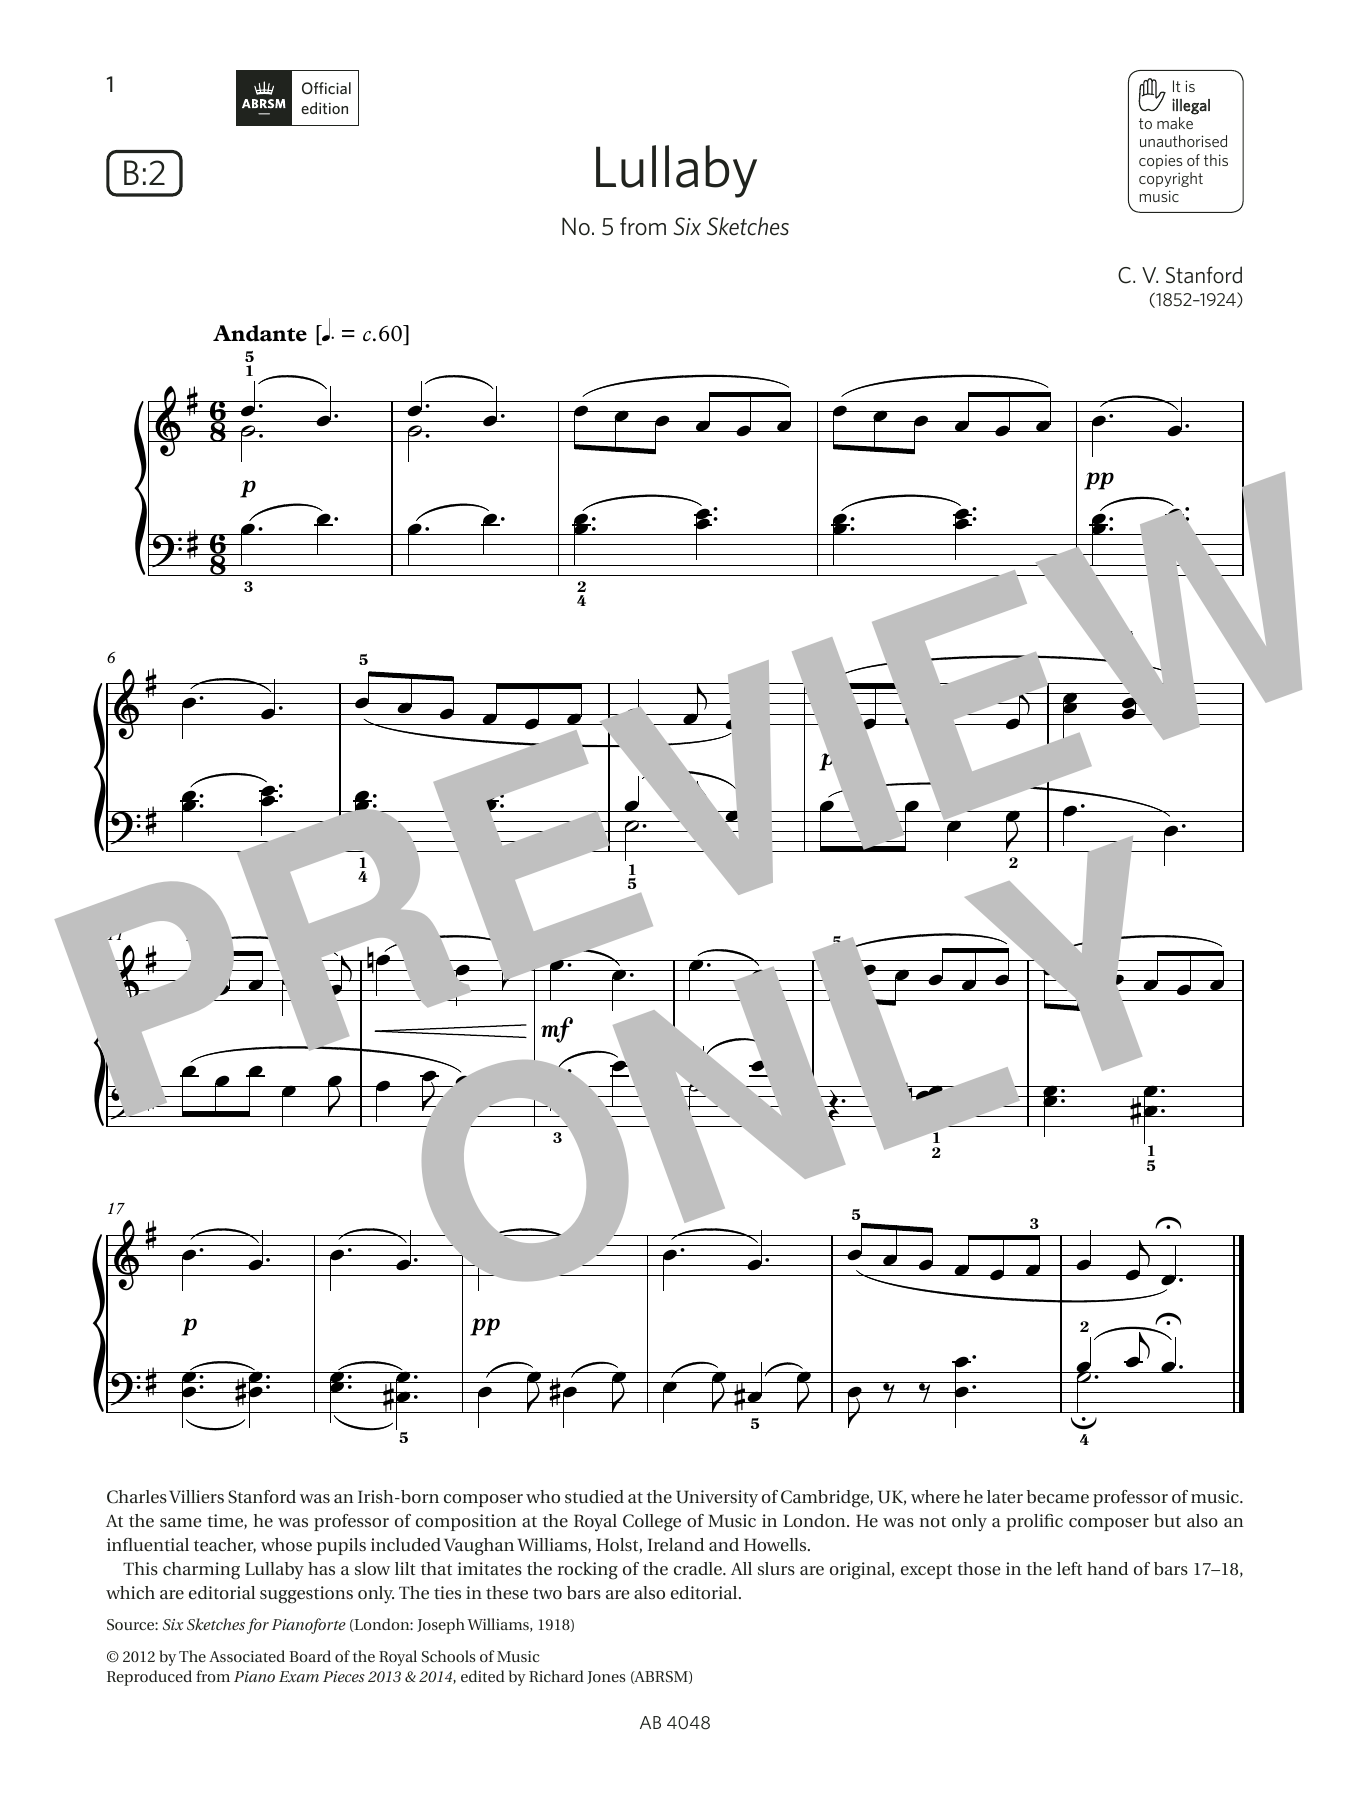 Download C V Stanford Lullaby (Grade 2, list B2, from the ABR Sheet Music